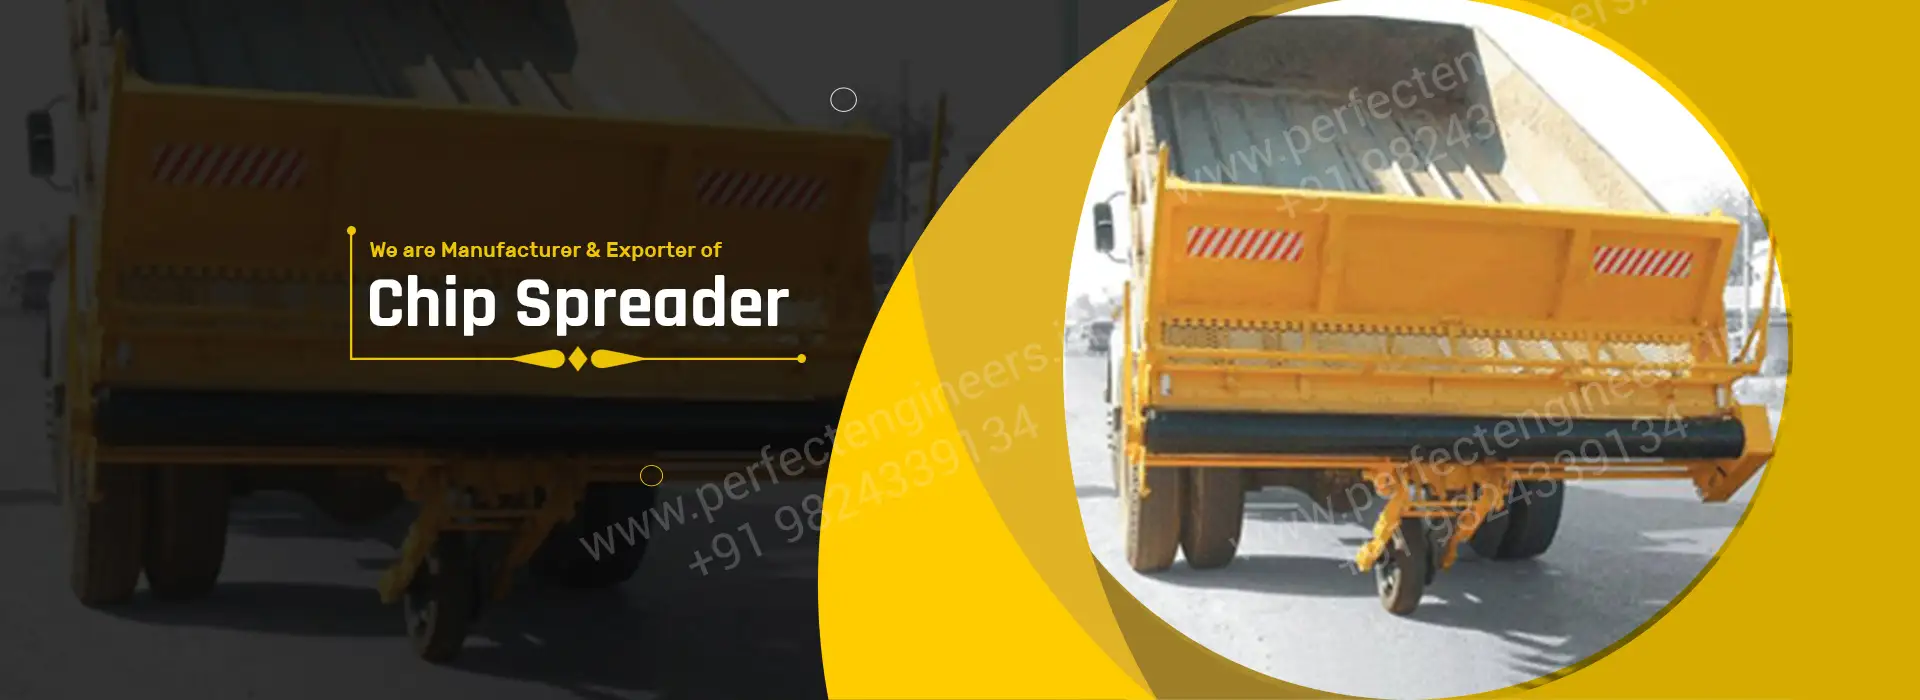 Chip Spreader Manufacturers & Suppliers in India